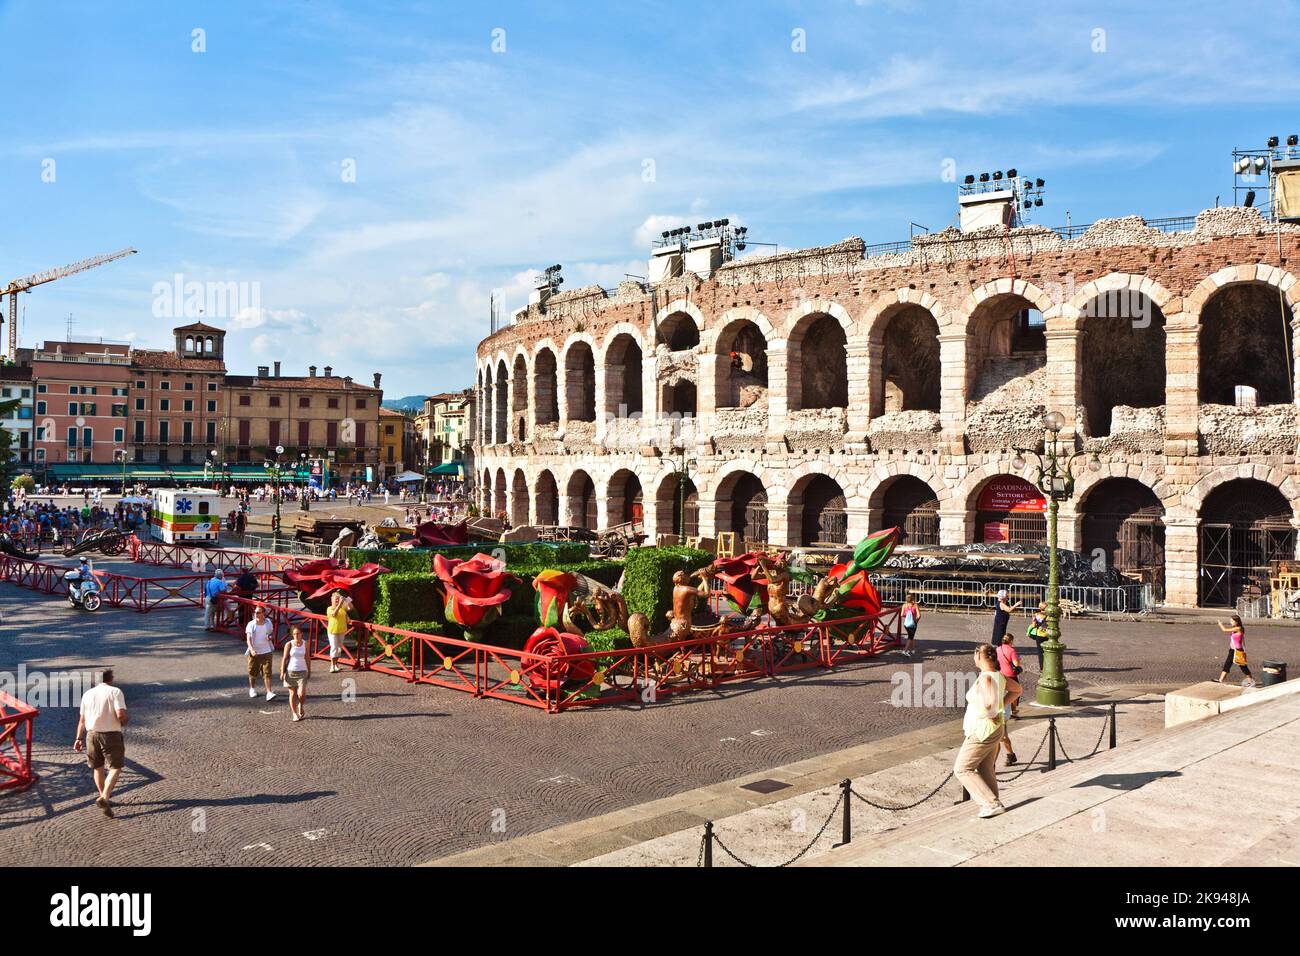 Verona, Italy - August 5, 2009:  requisites for the Arena in Verona Italy. People walk around  in front of the famous old roman Arena of Verona in Ver Stock Photo